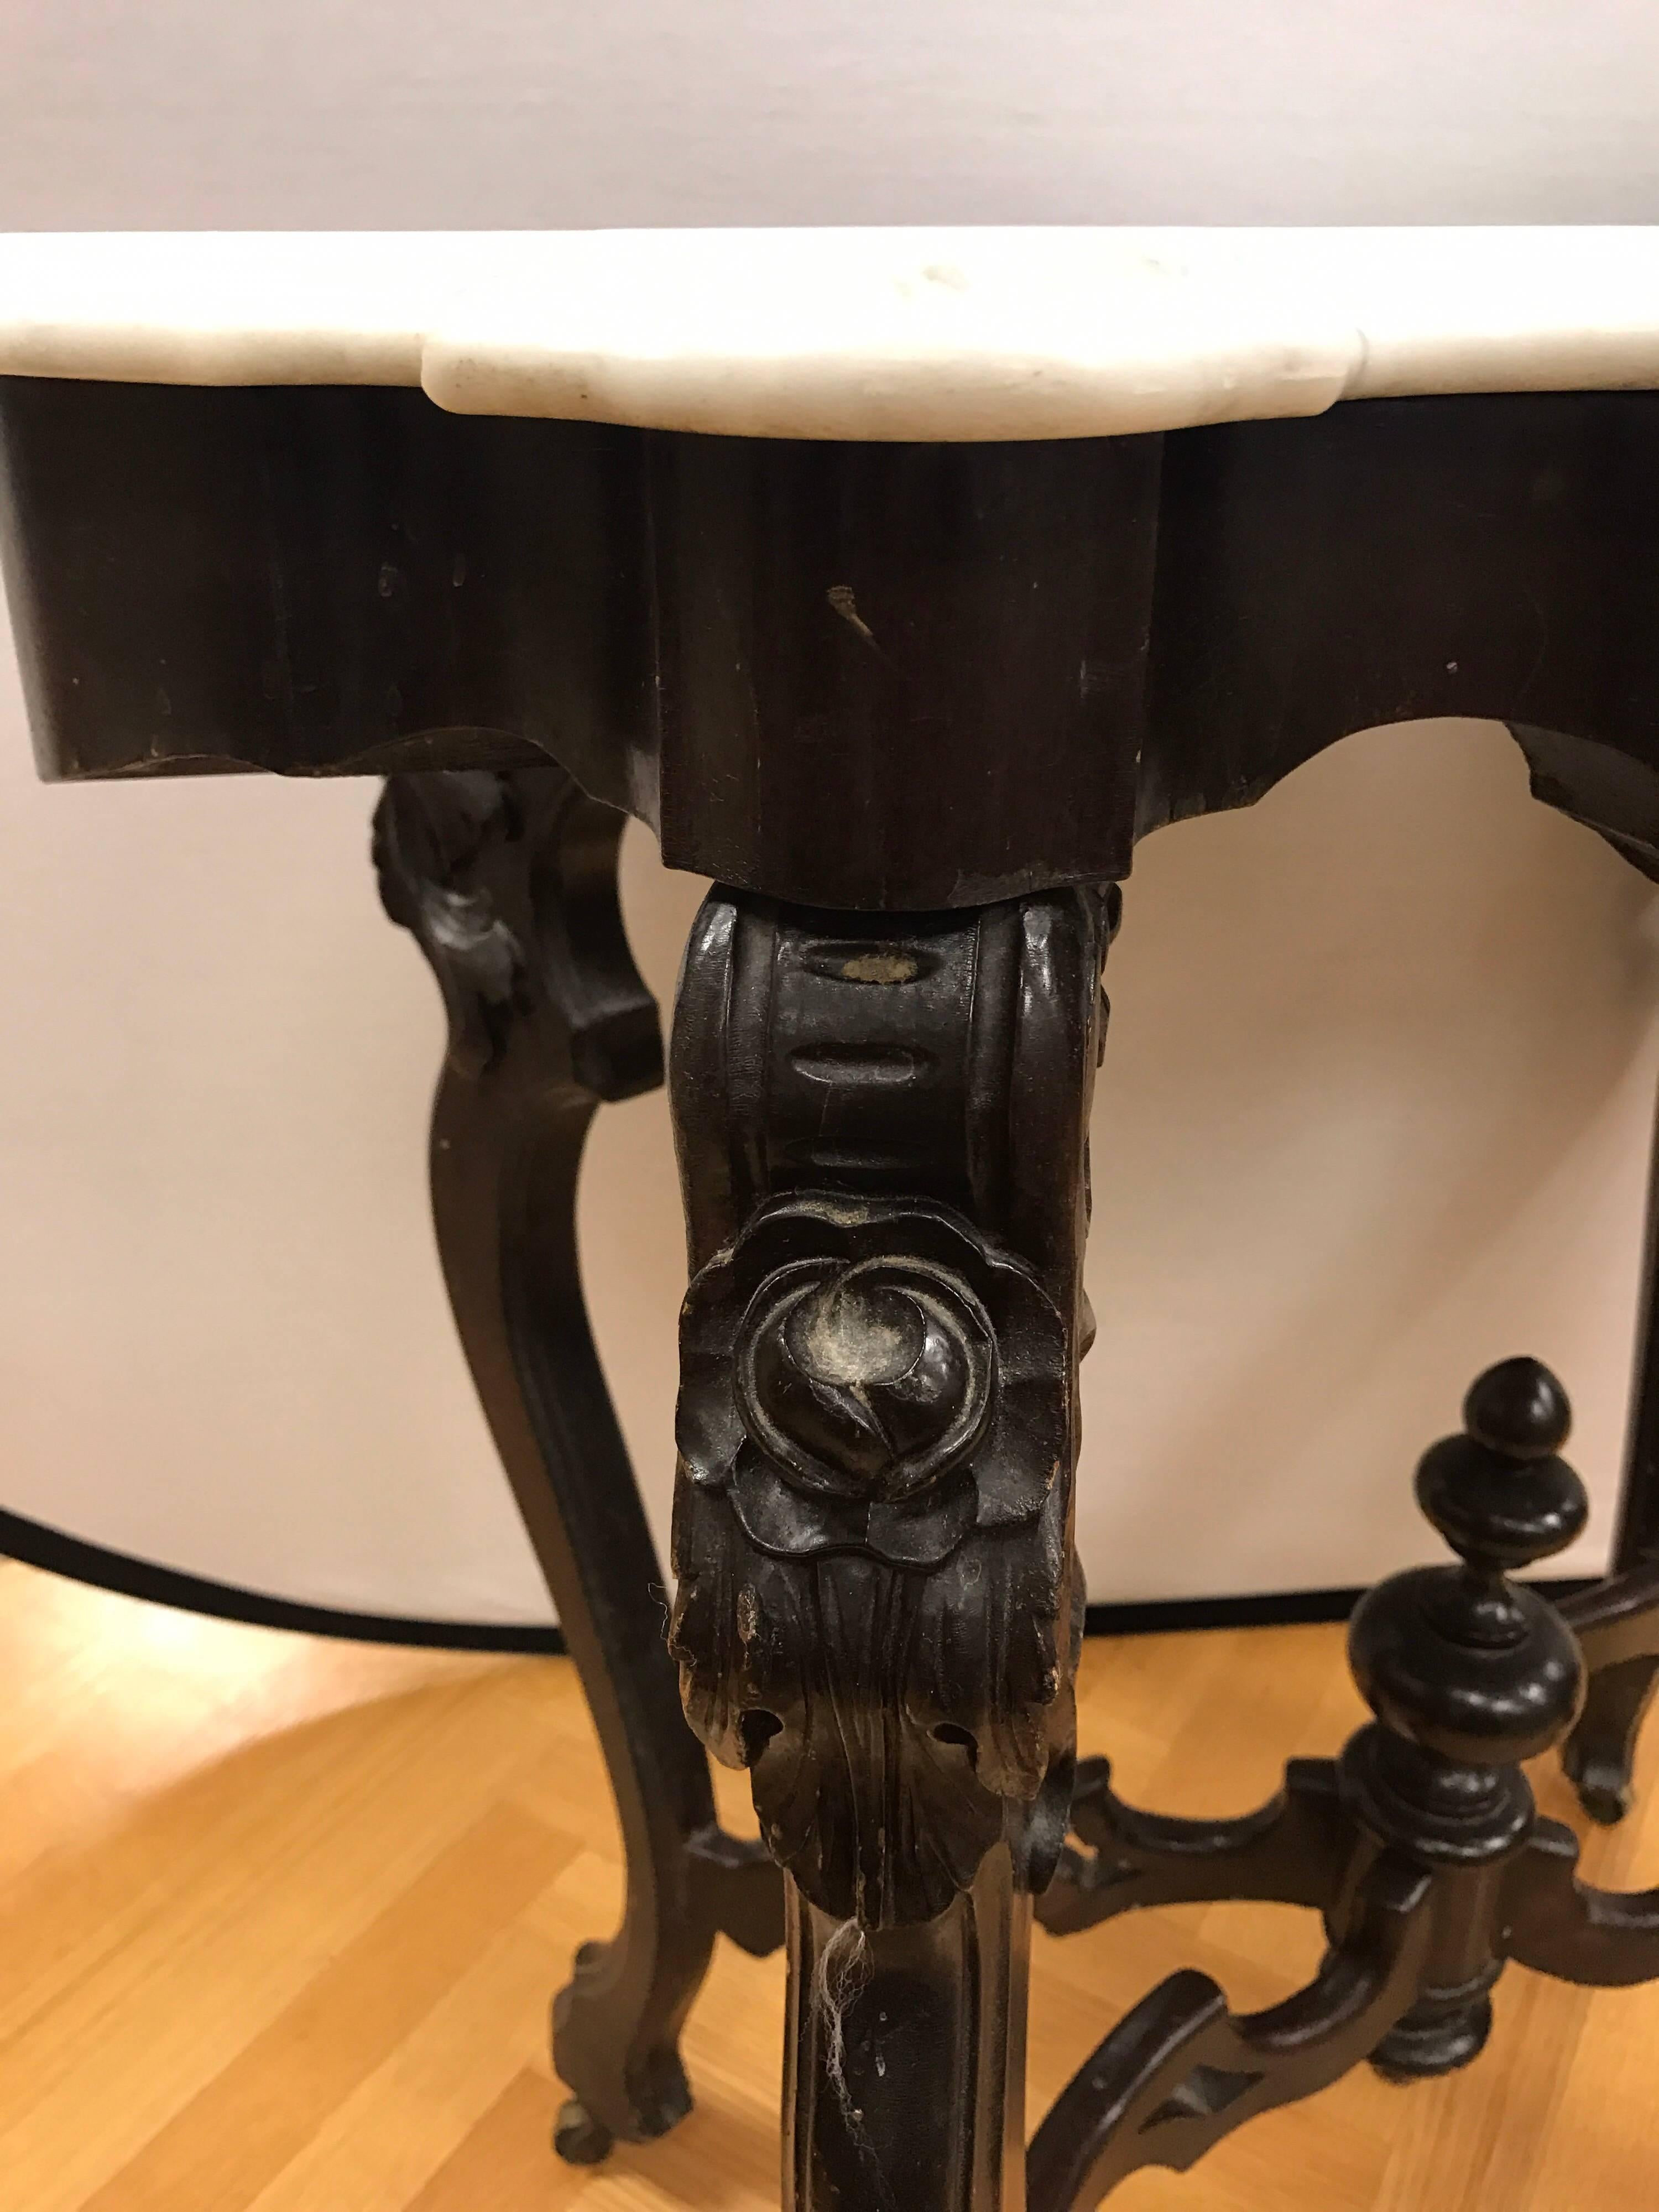 antique foyer table